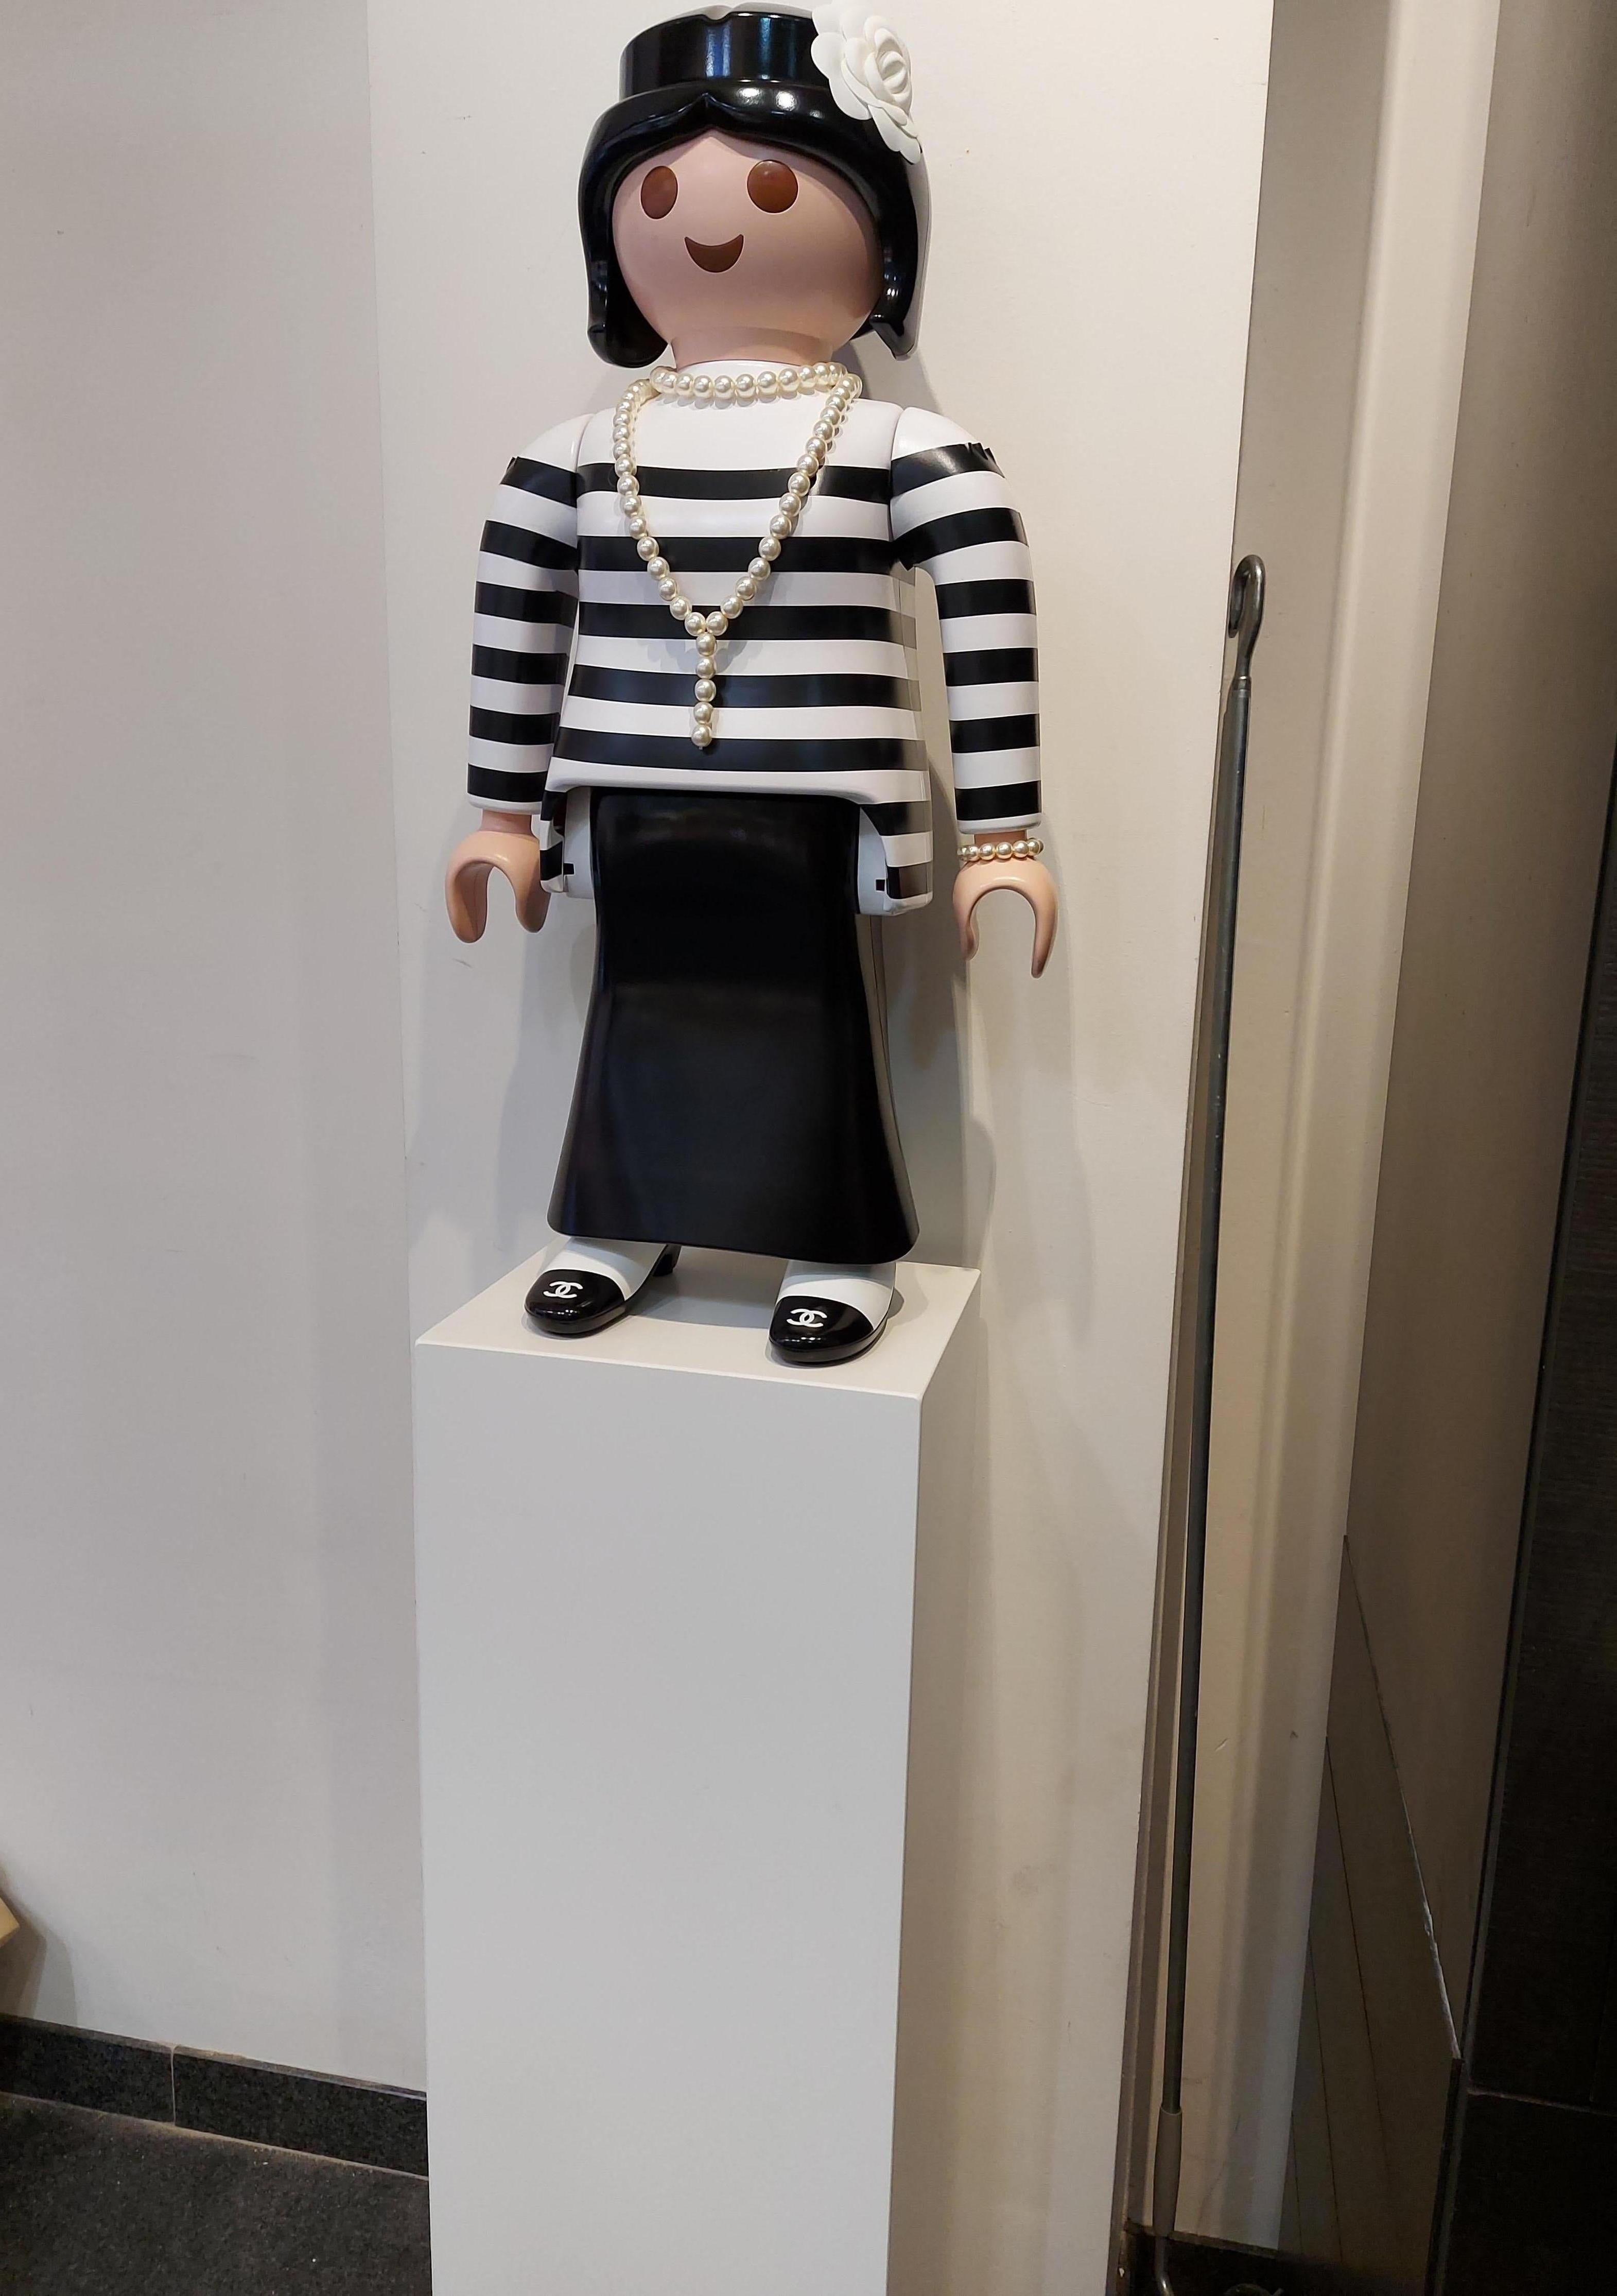 Playmobil / Chanel Figure by PACHE 